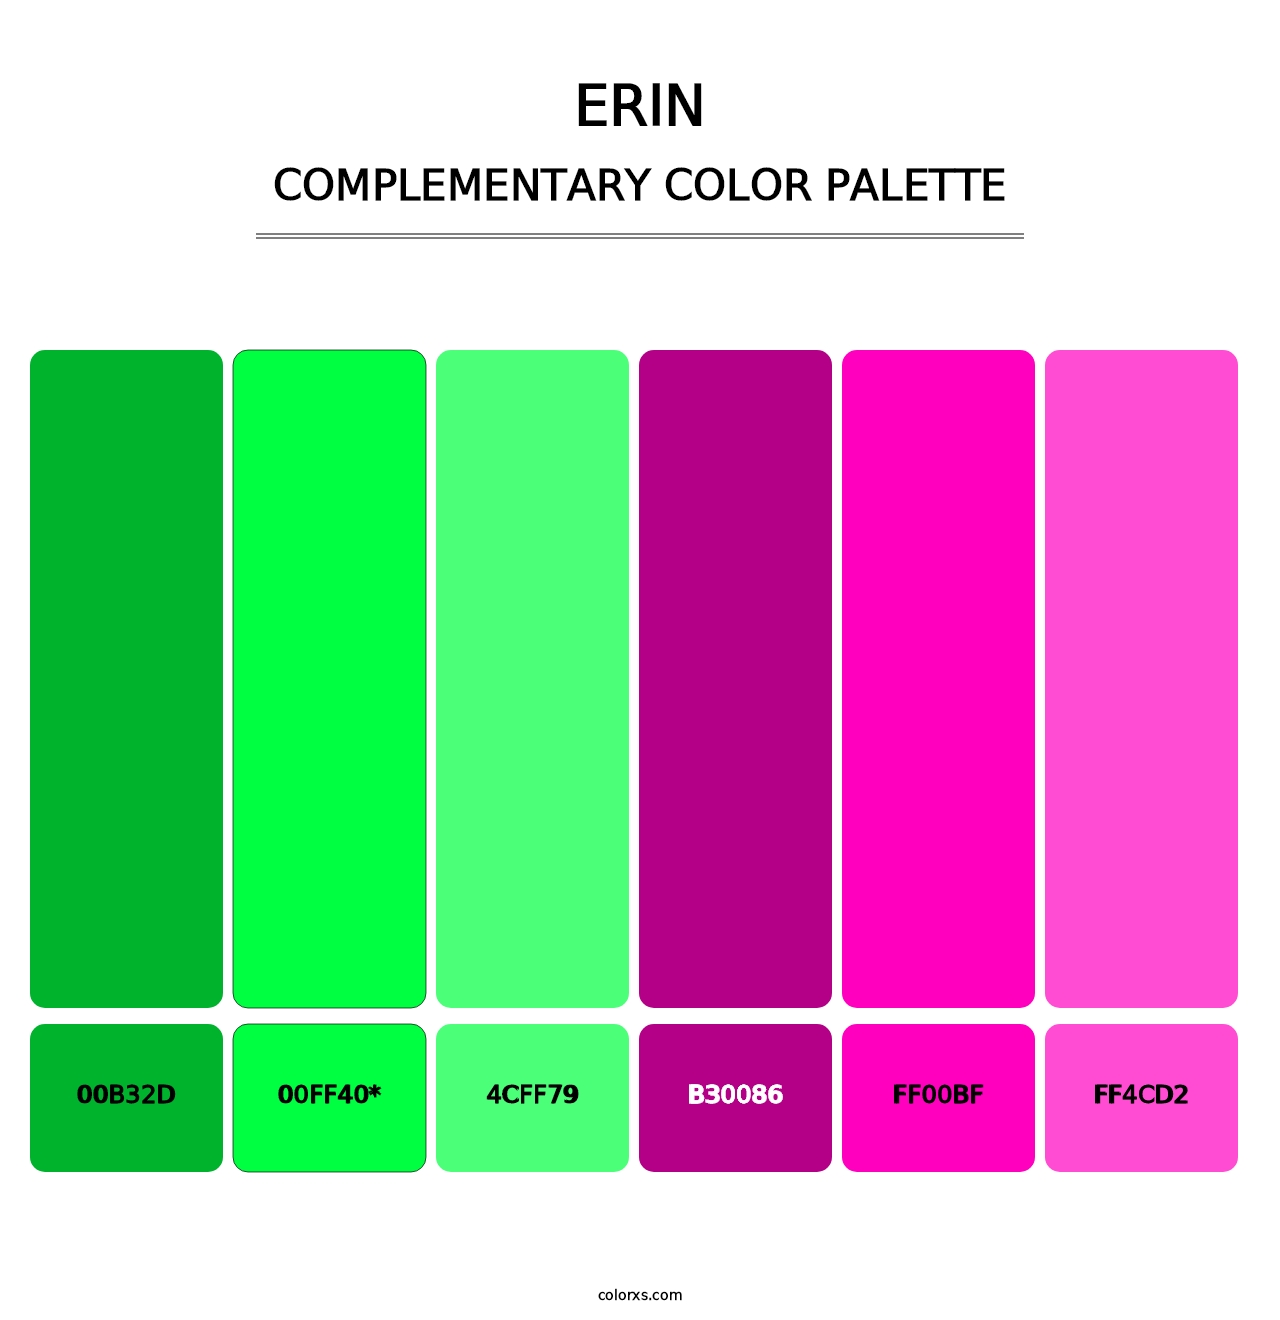 Erin - Complementary Color Palette